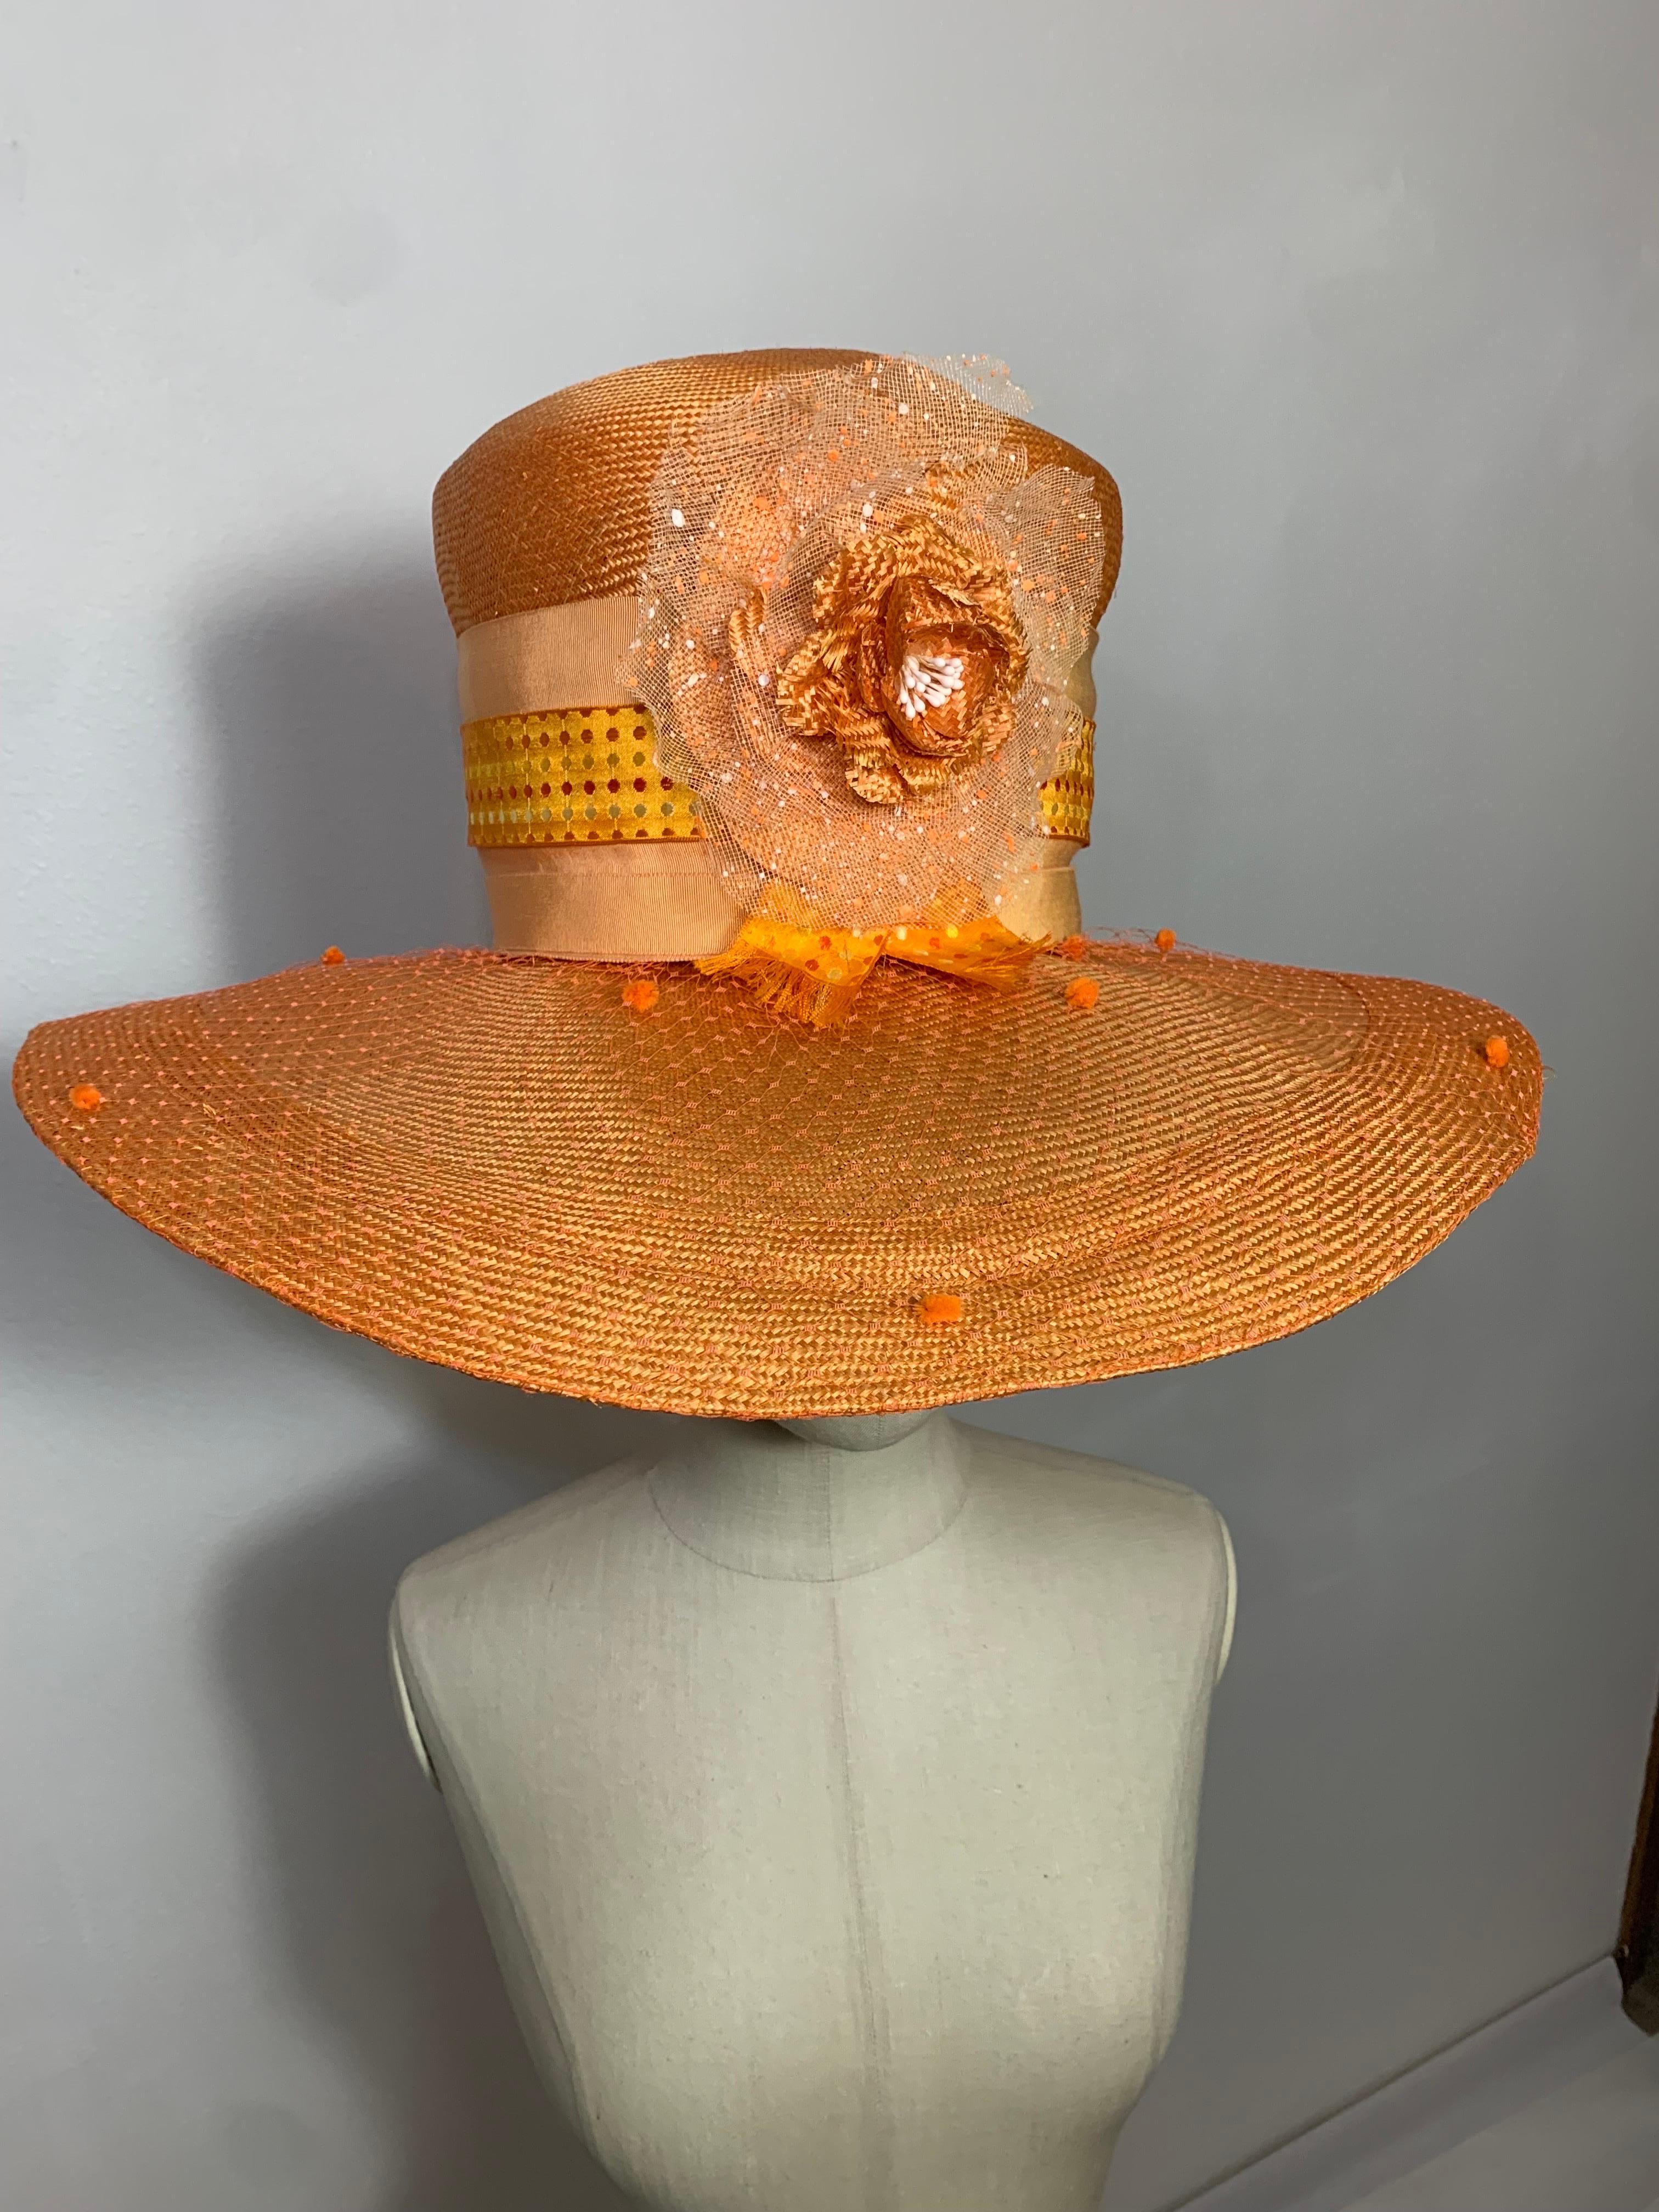 Custom Made Tangerine Straw Wide Brim Hat w Flower Embellishment and Veiled Brim: Suzanne Couture Millinery crafted this stunning hat in an unusual shade with textured ribbon banding and brim wrapped in chenille dotted veiling. Brim measures 19